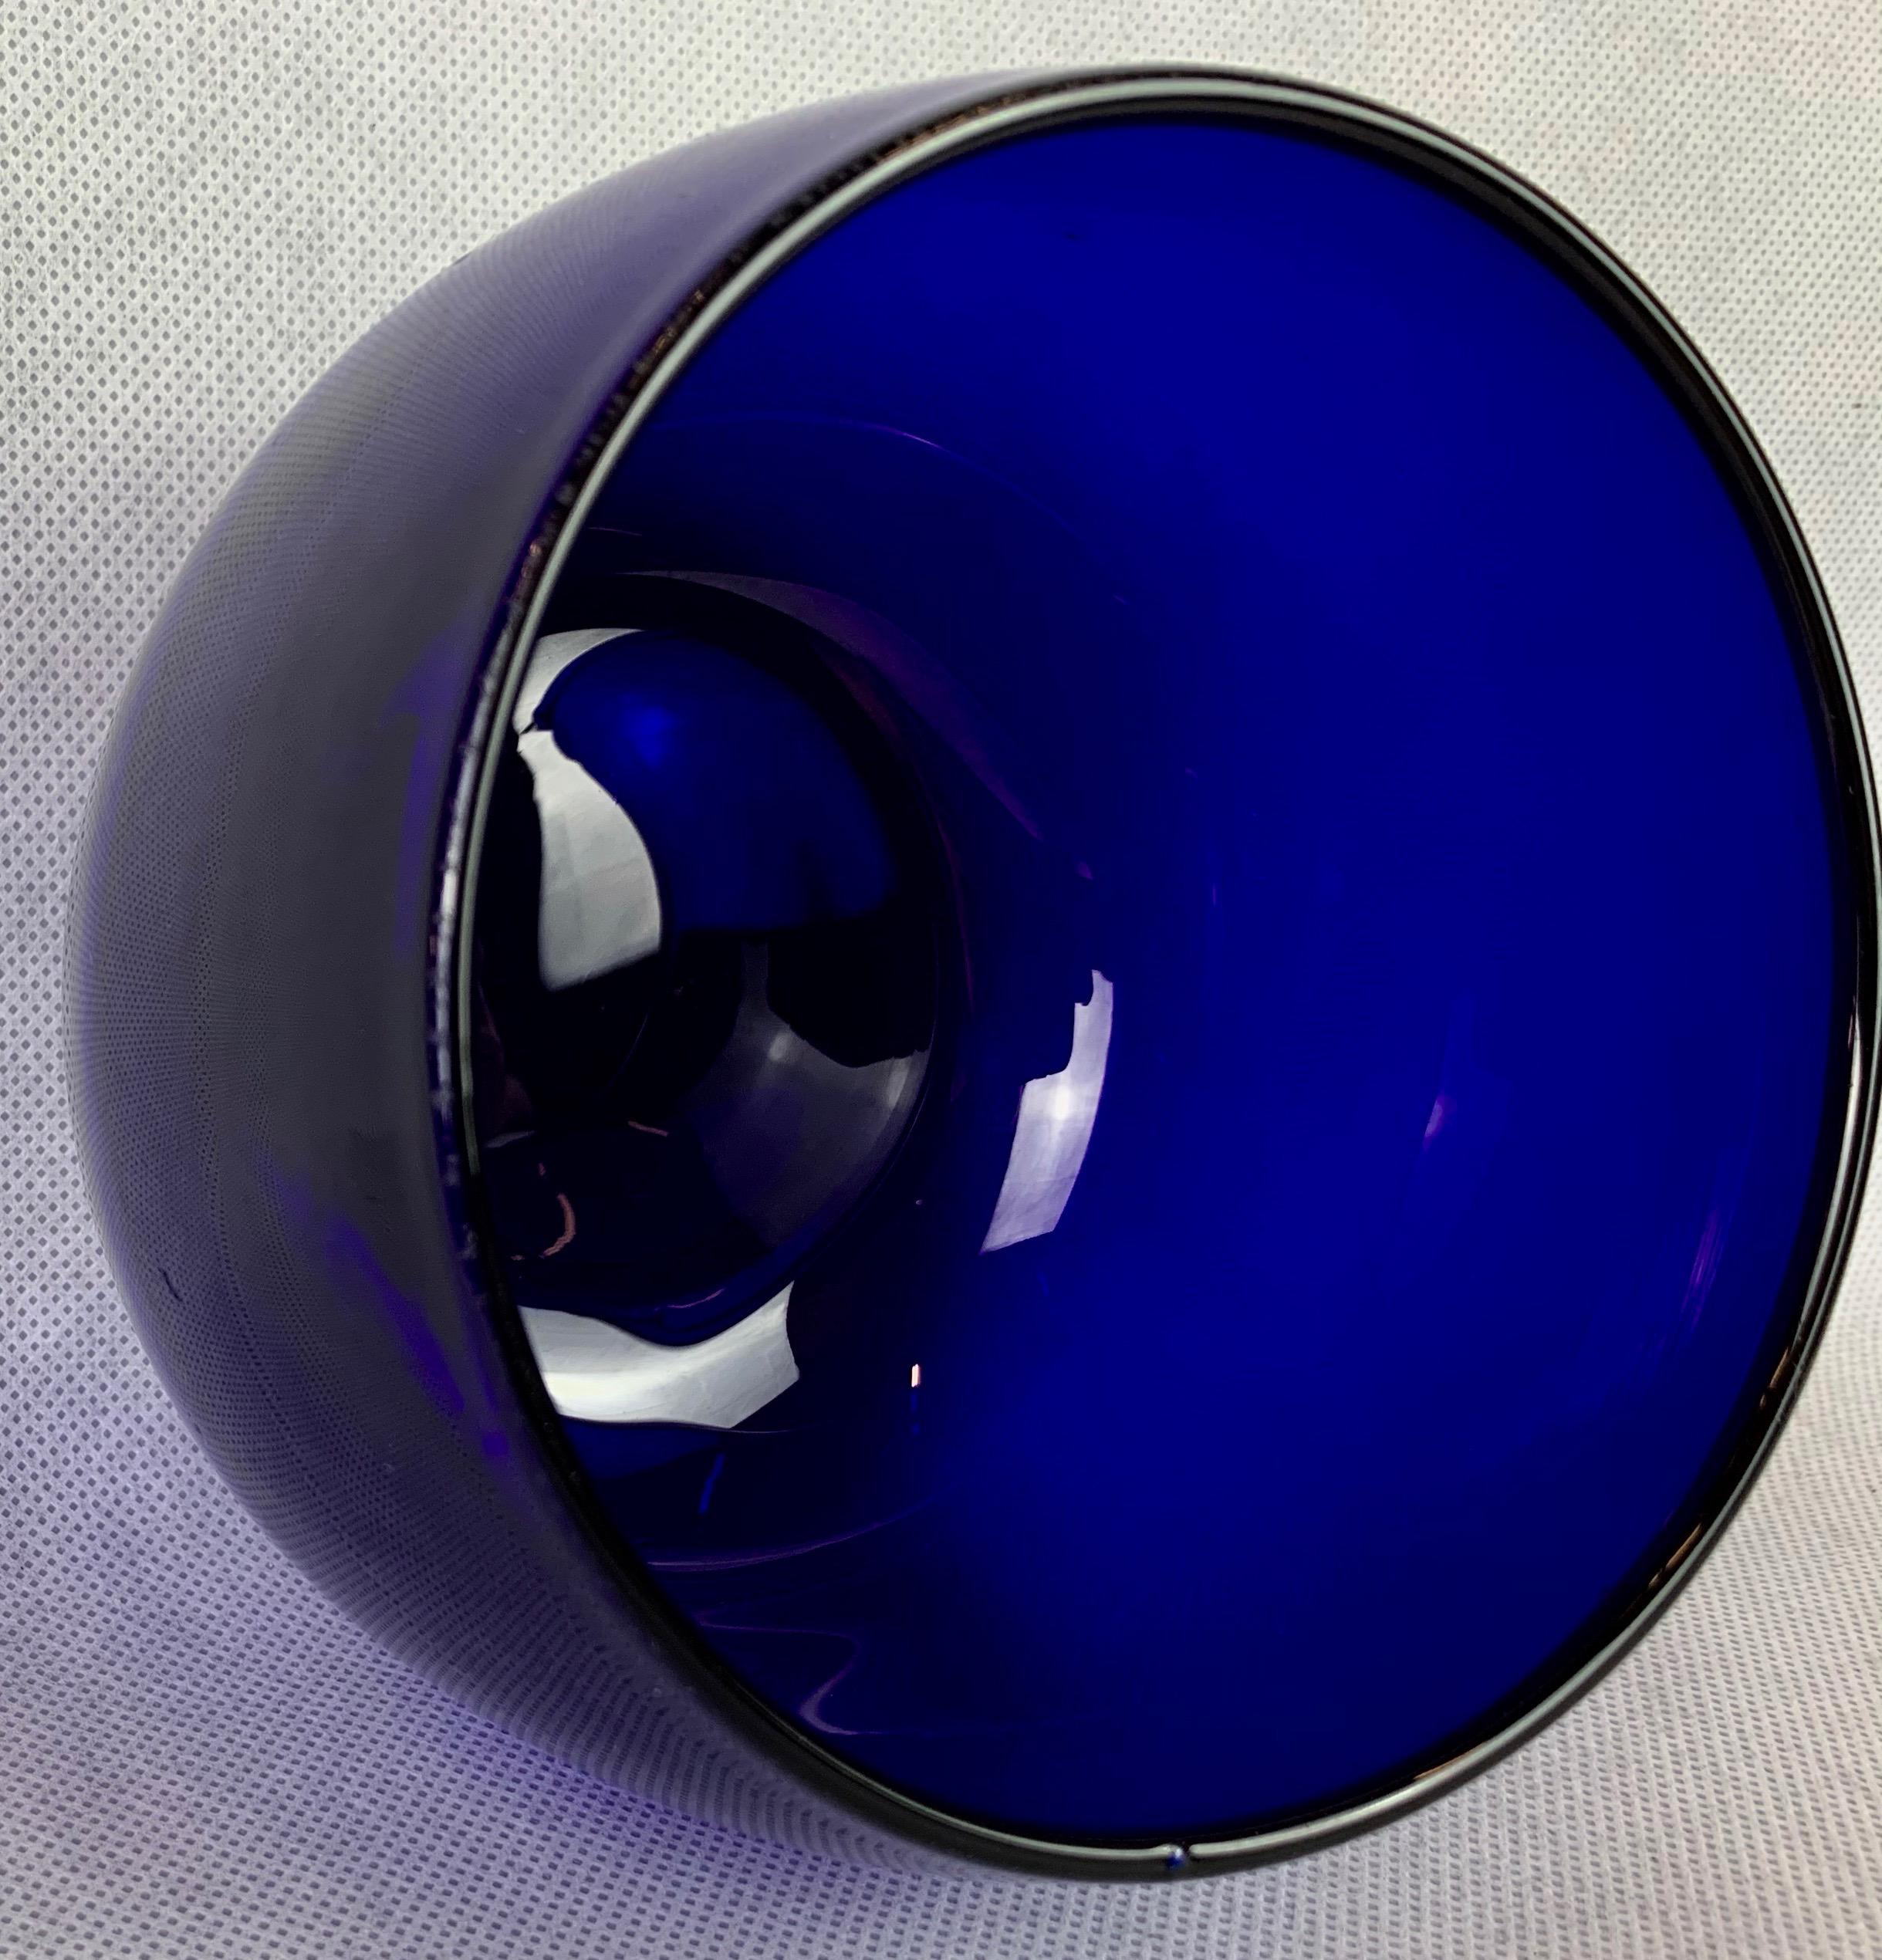 Large hefty hand blown Georgian Bristol blue finger bowl. Smooth sided while slightly curving towards the top rim. The base has a generous polished pontil exhibiting evidence of the glass blowers artistry. The bowls can be wonderfully repurposed to